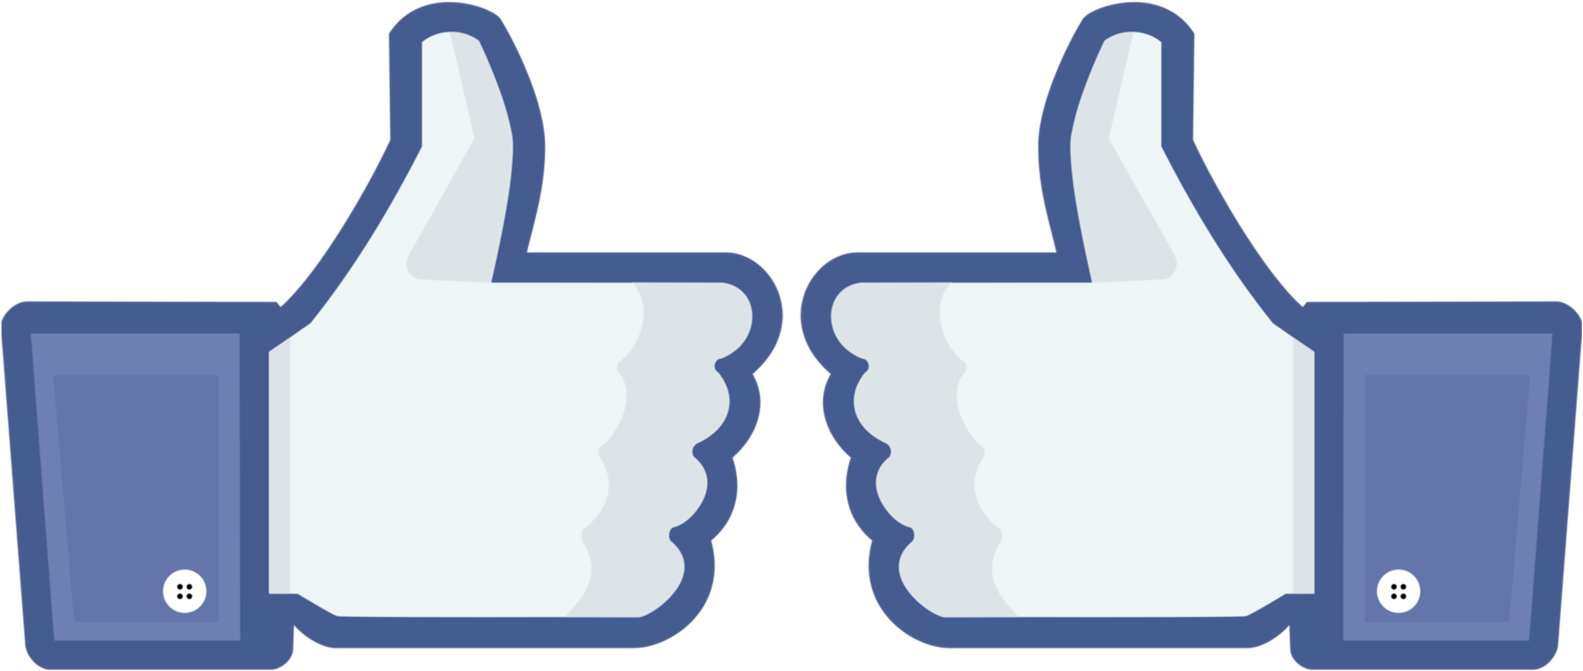 Facebook Like Thumbs Up Png Likes On Facebook